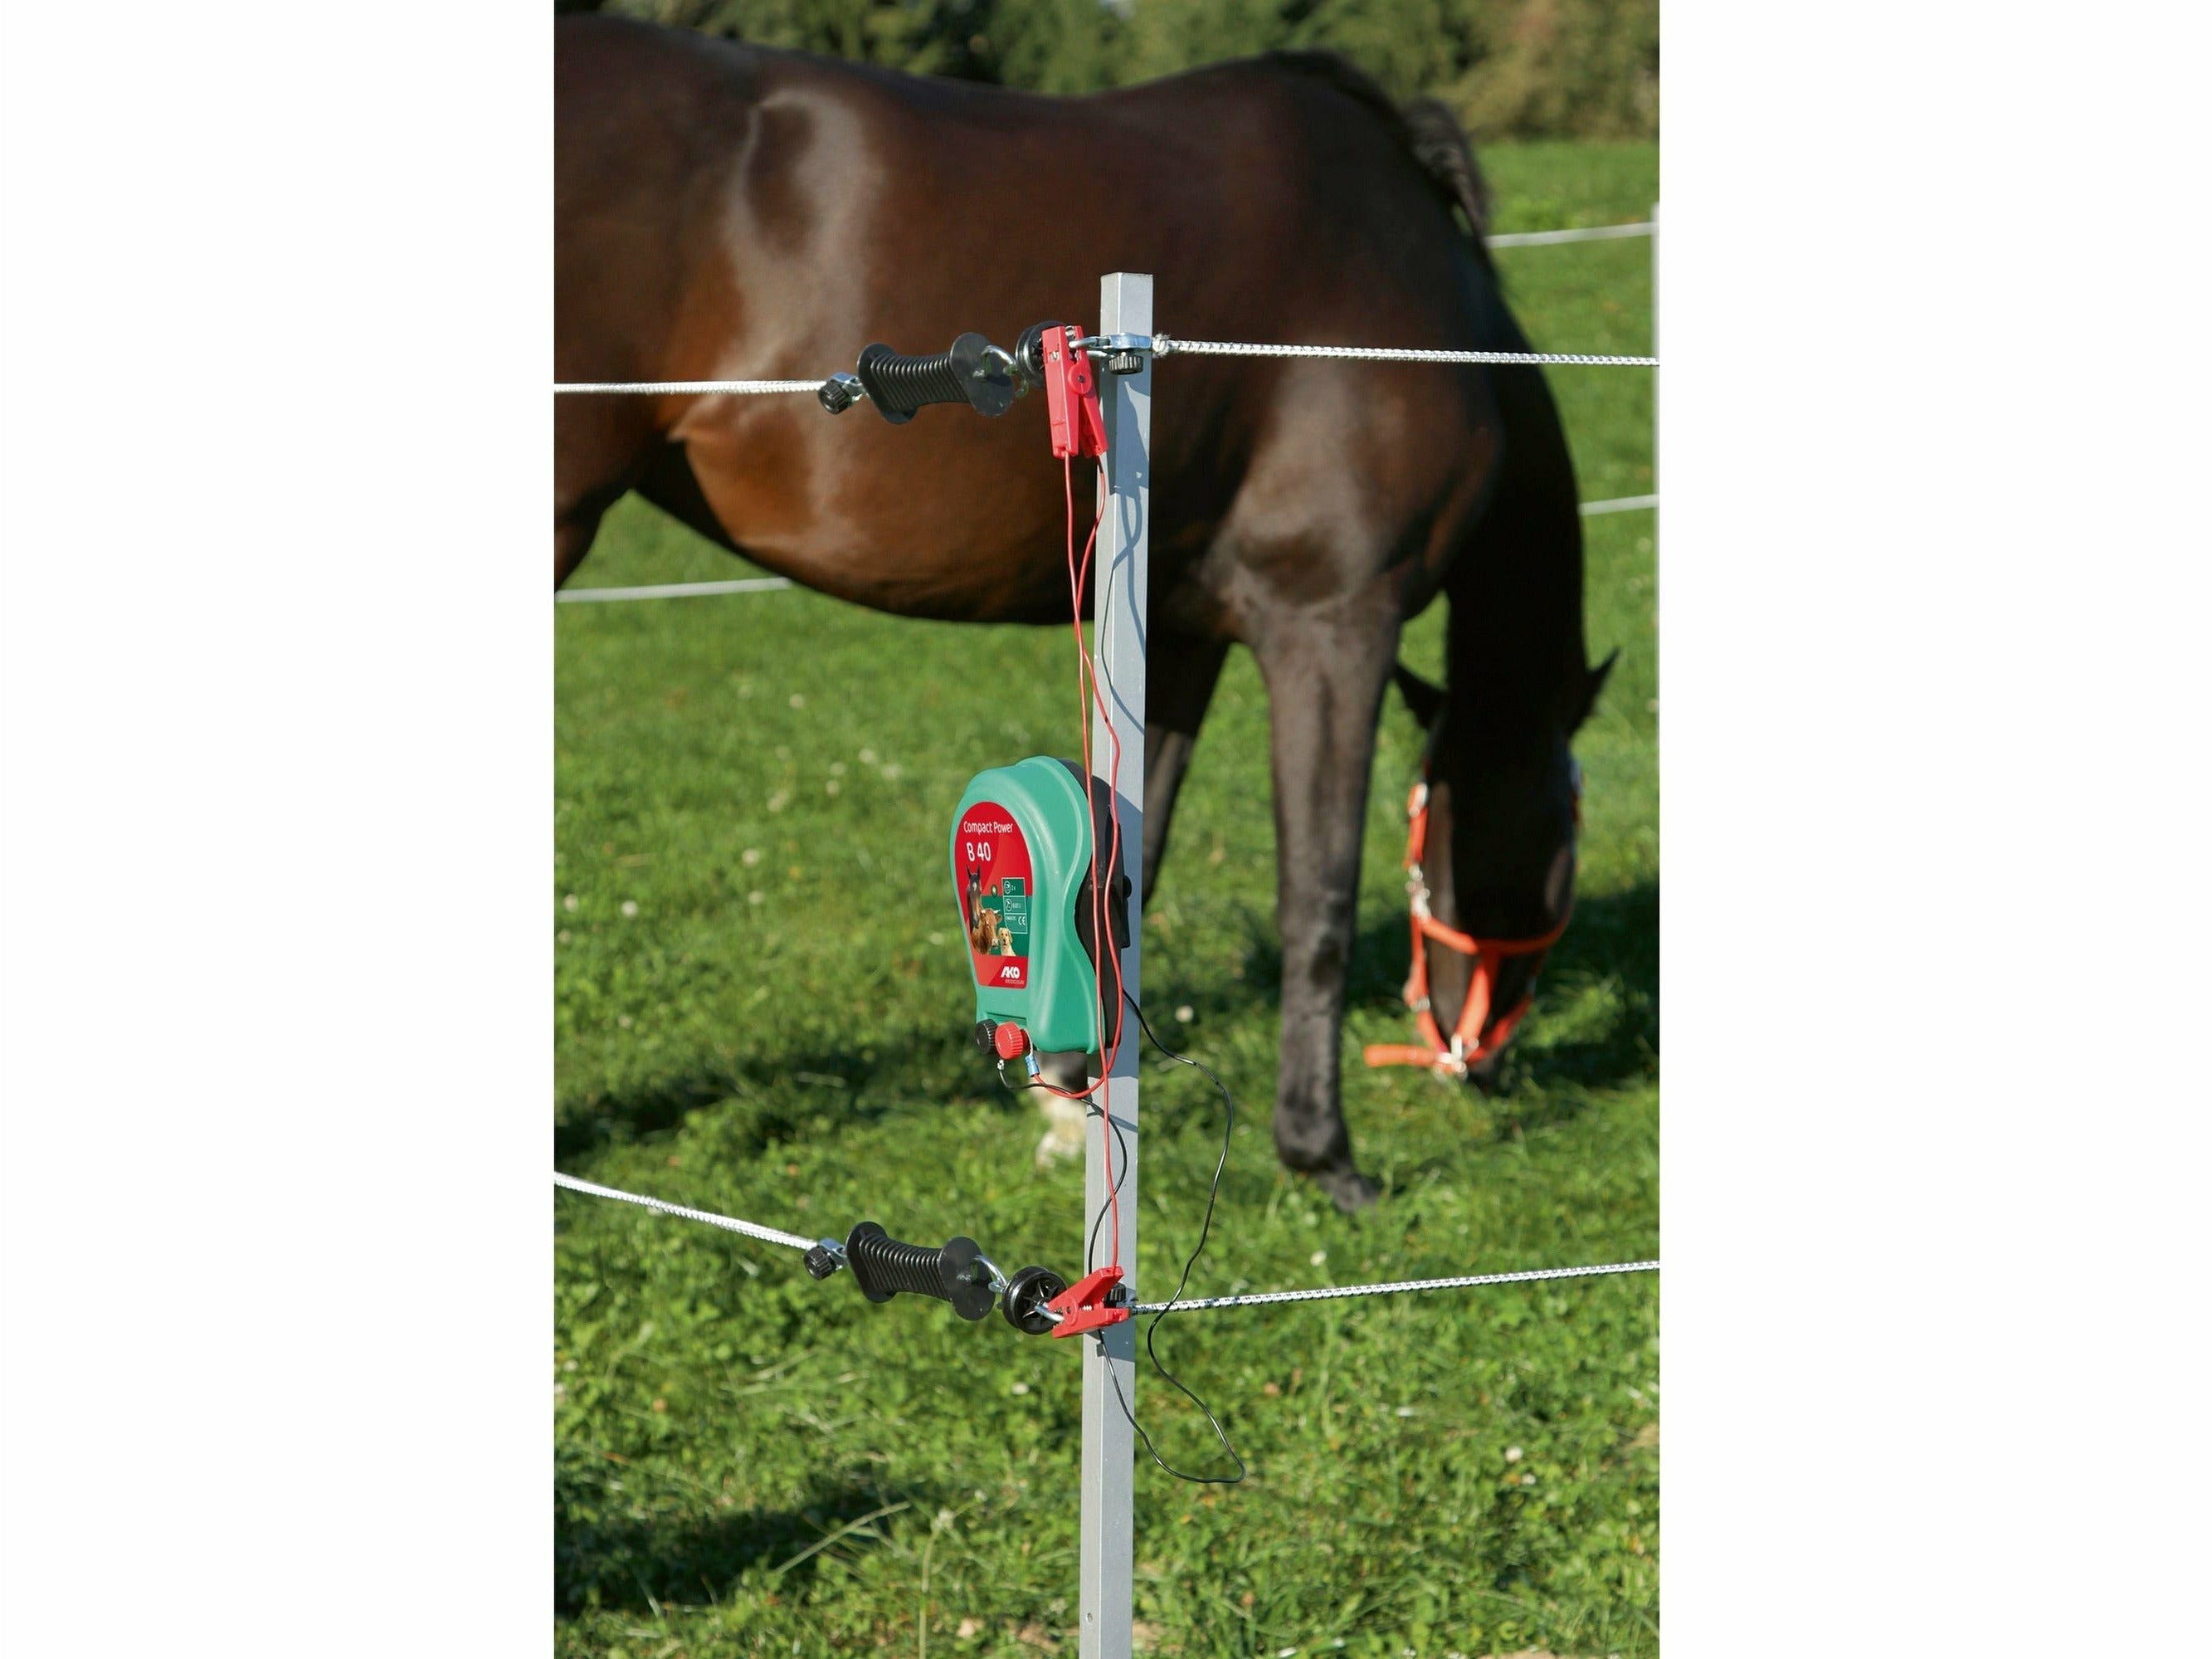 Icelandic Horse tournament/paddock set 7 x 7 m, with electric fence device